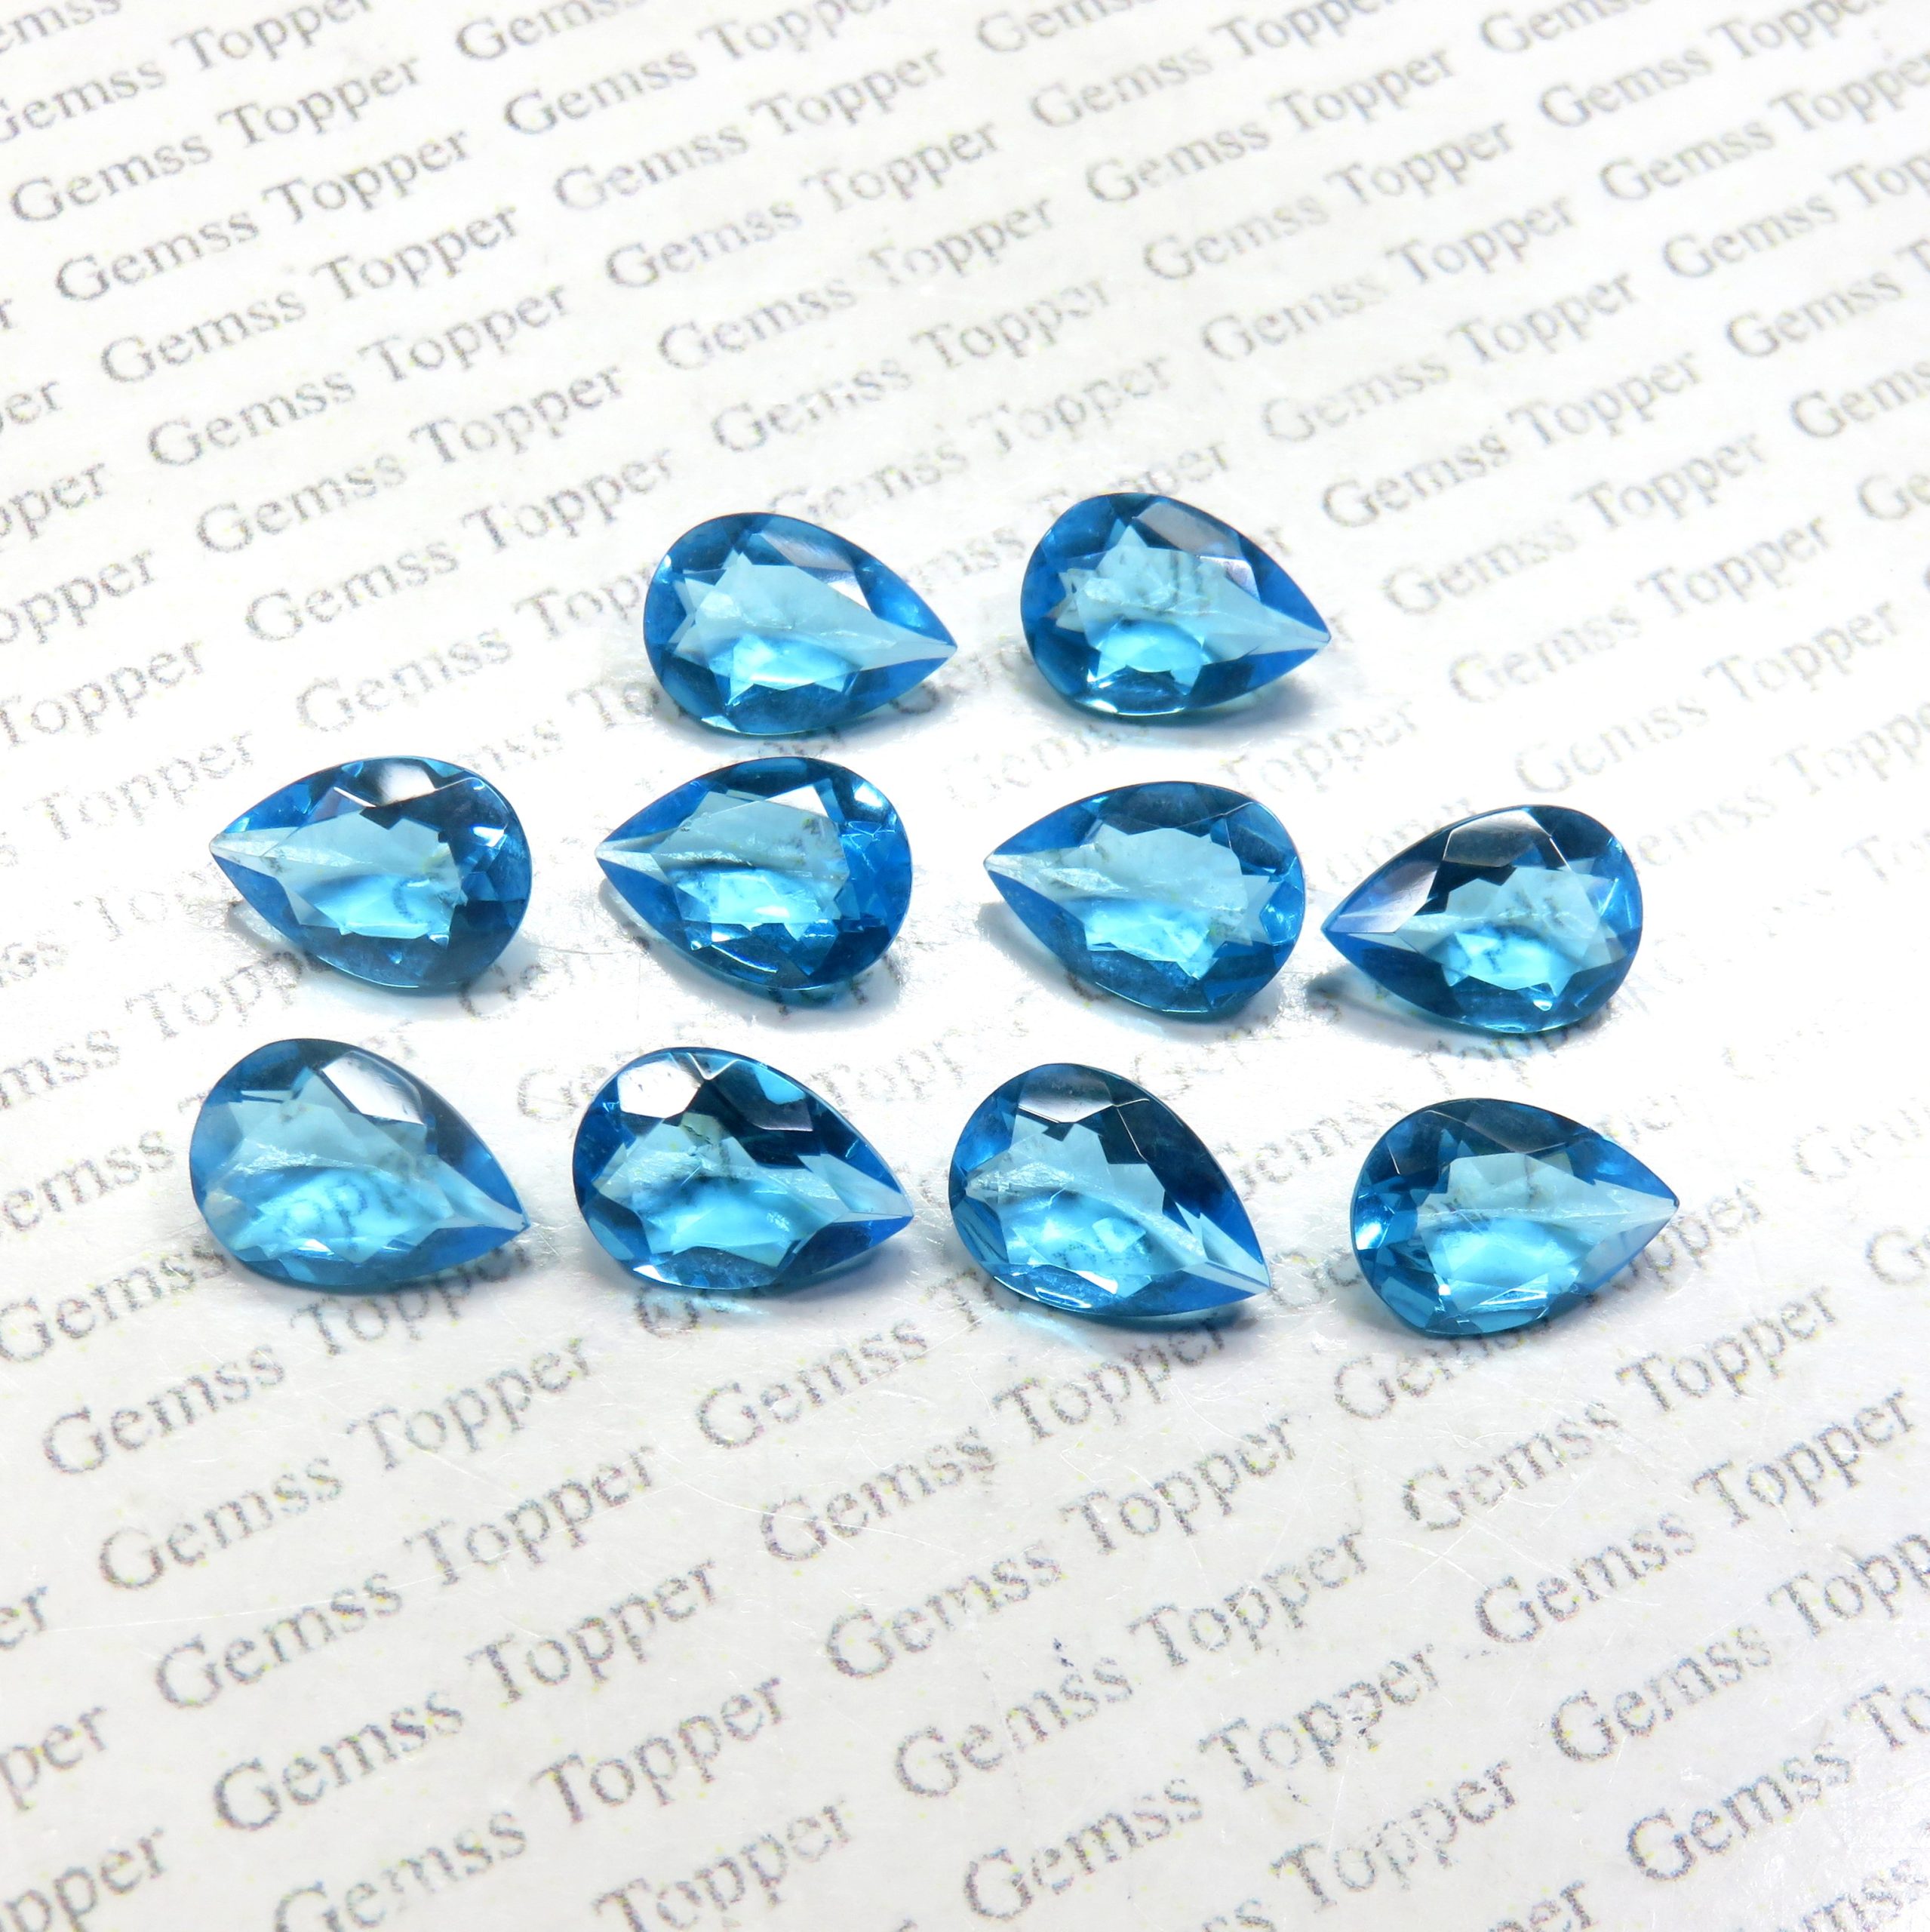 100% Natural Swiss Blue Topaz 8x12 mm Pear Faceted- AAA Quality Faceted Swiss Blue Topaz